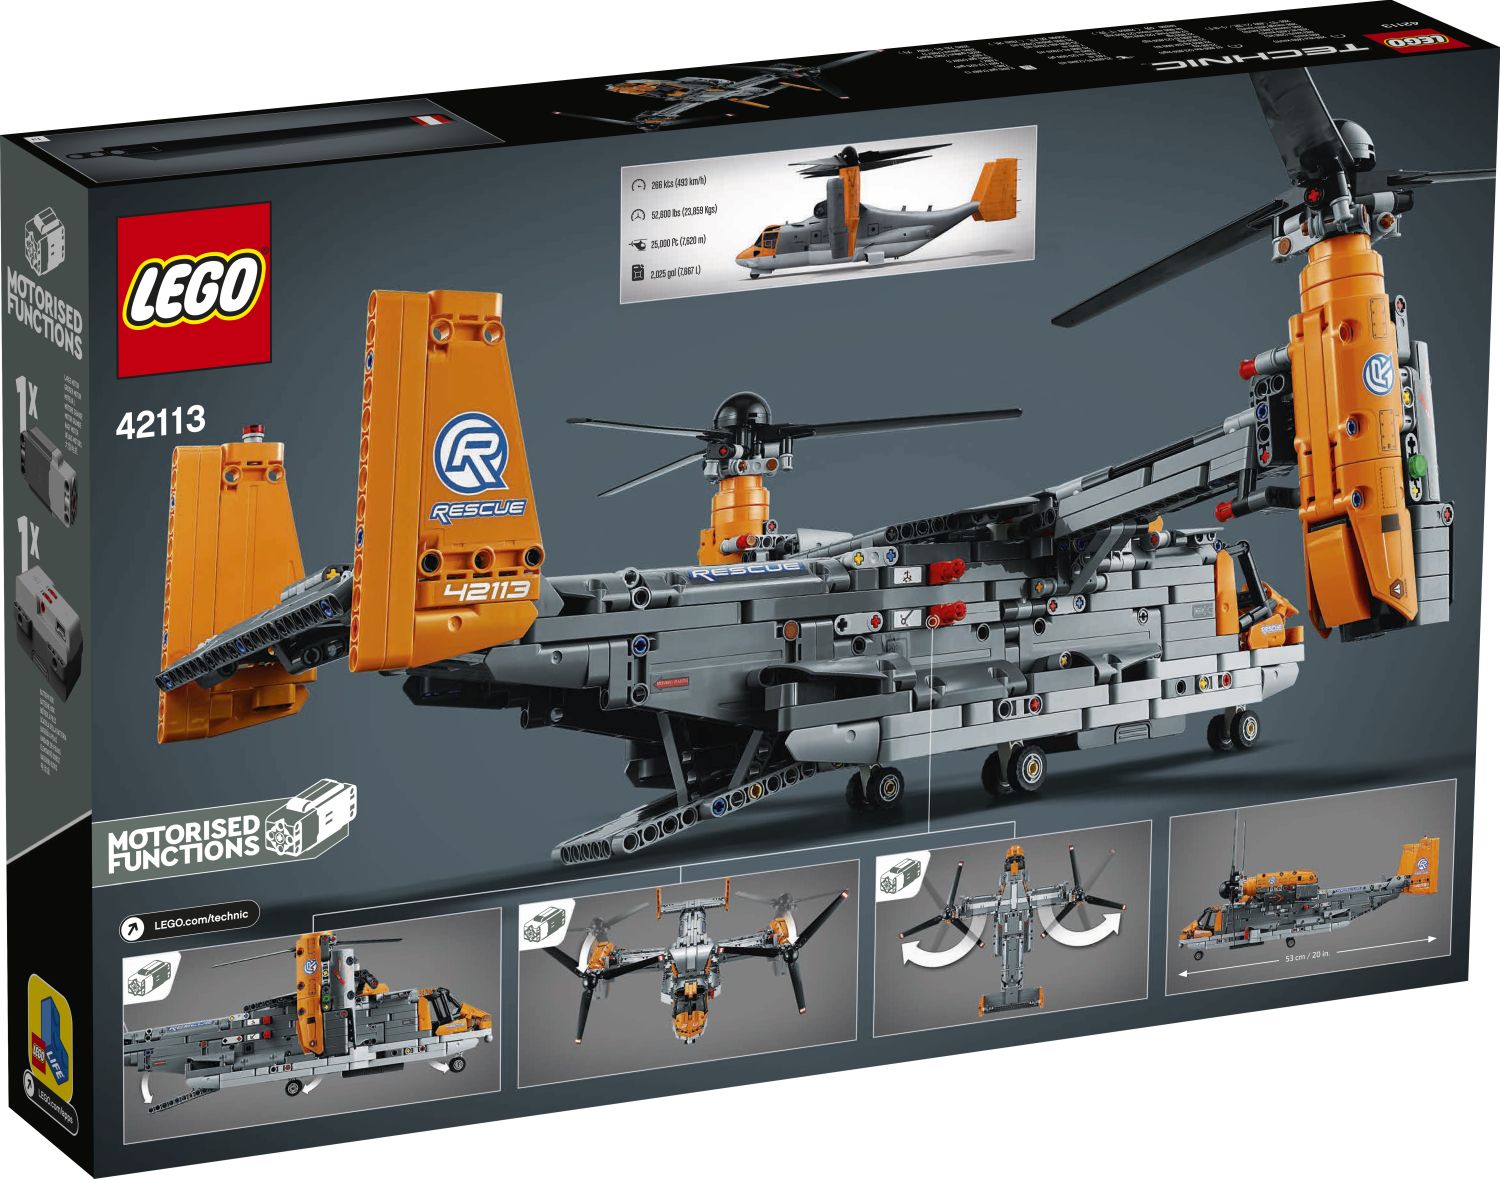 Technic lego - Page 303 - Scale Models - PistonHeads